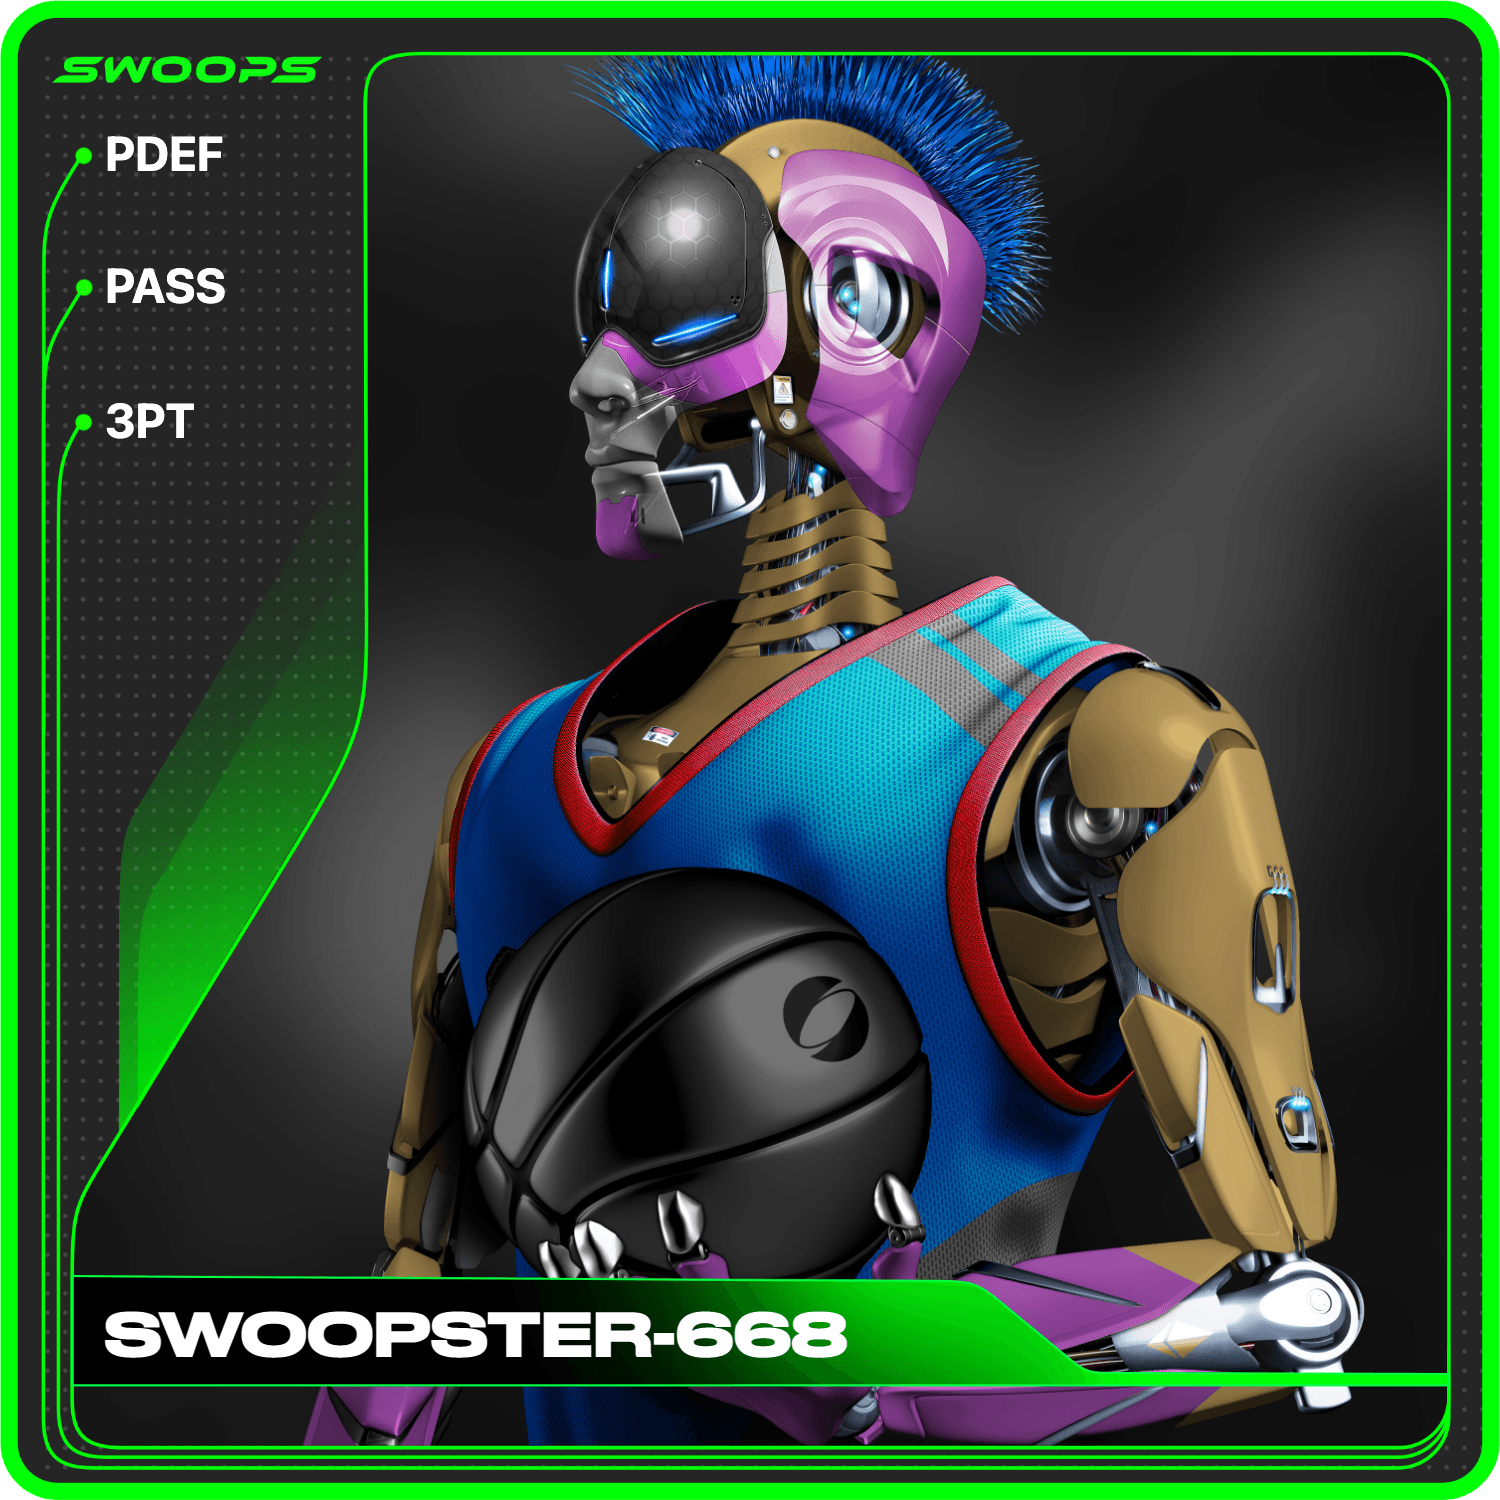 SWOOPSTER-668